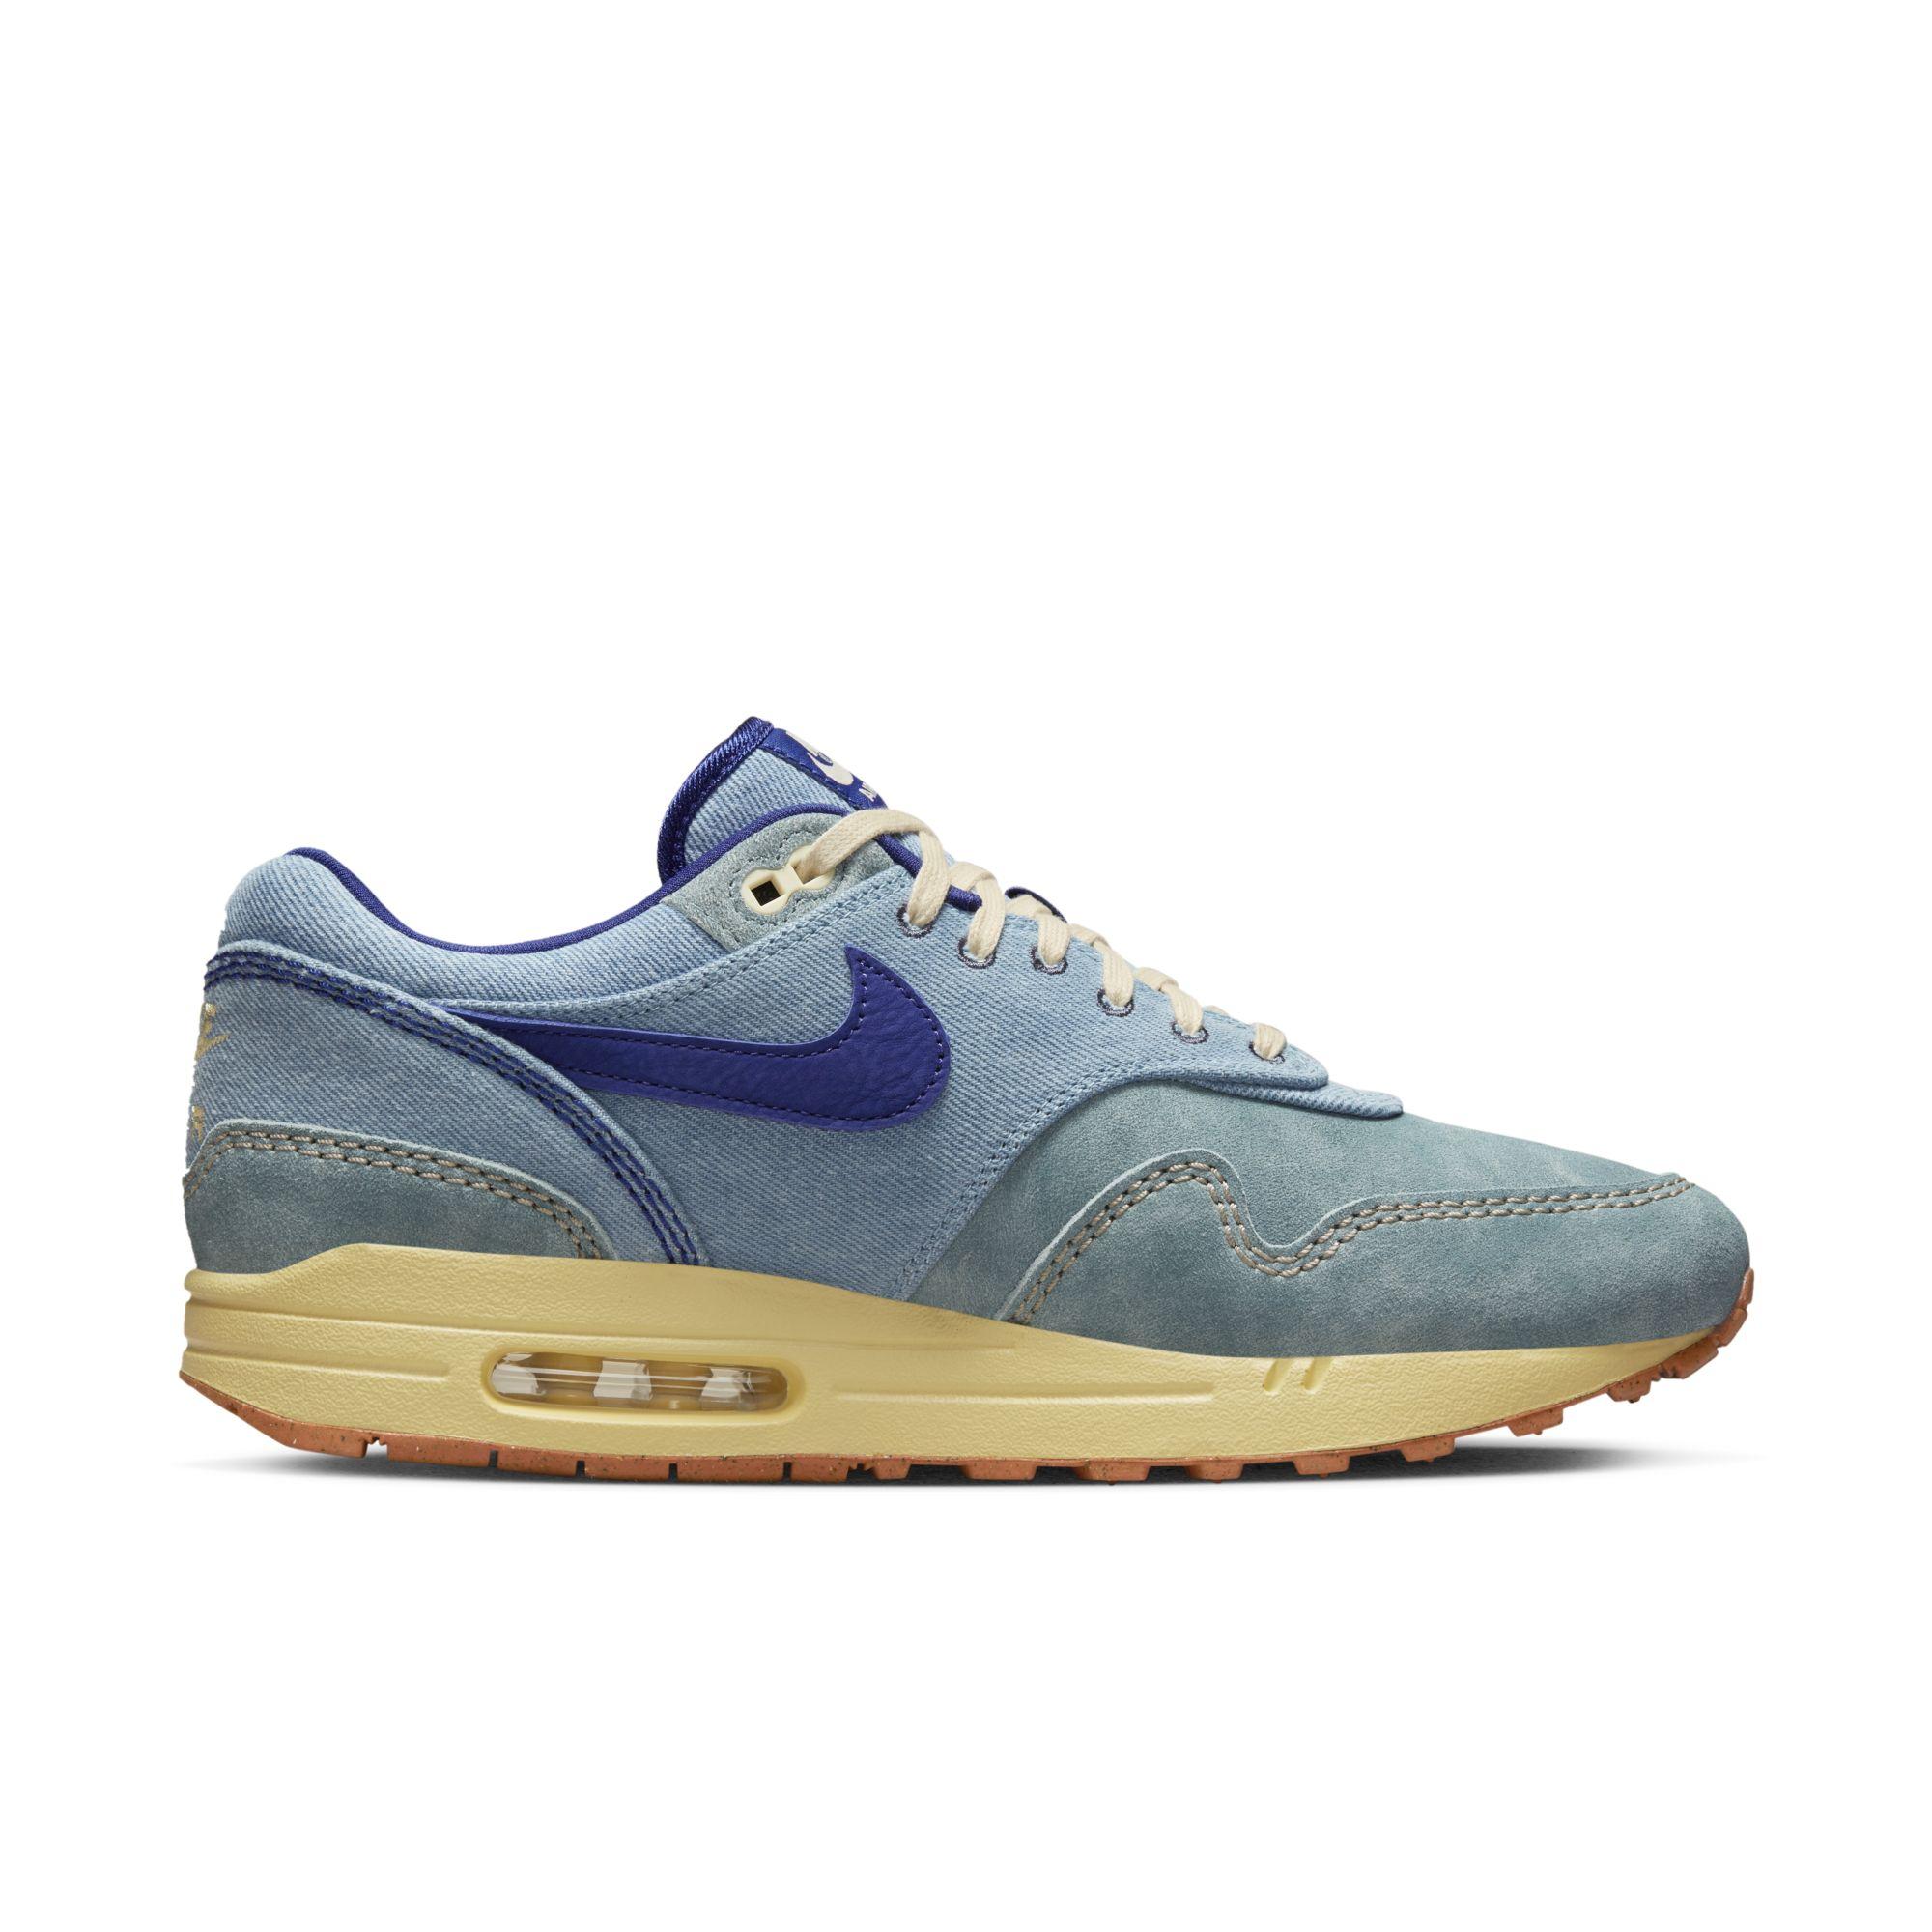 Nike Air Max 1 Premium Shoes in Blue for Men | Lyst